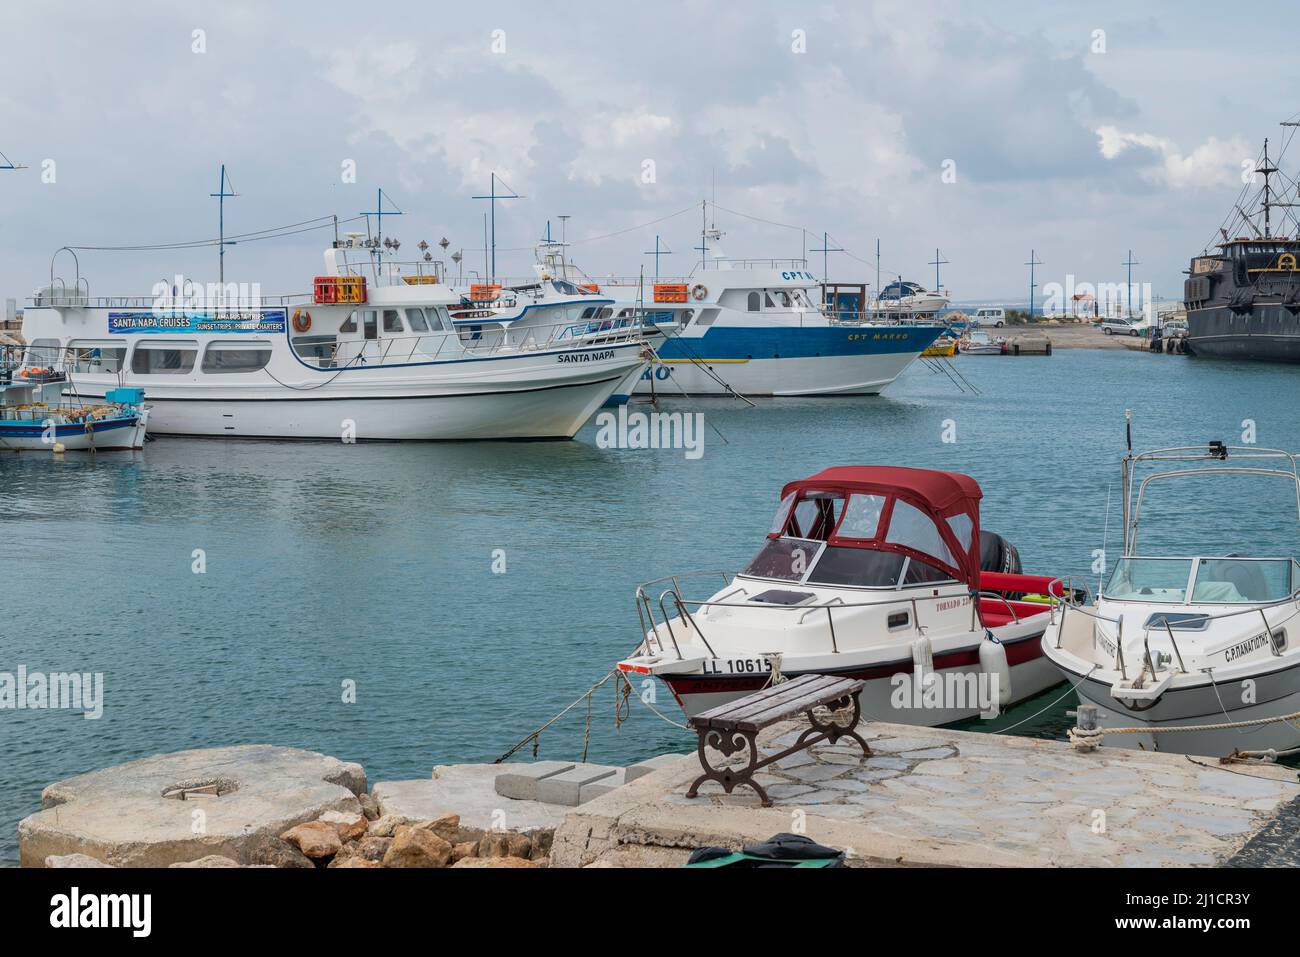 August 11, 2020 .Cyprus Ayia Napa .Promenade with pubes in the city for fishermen Stock Photo